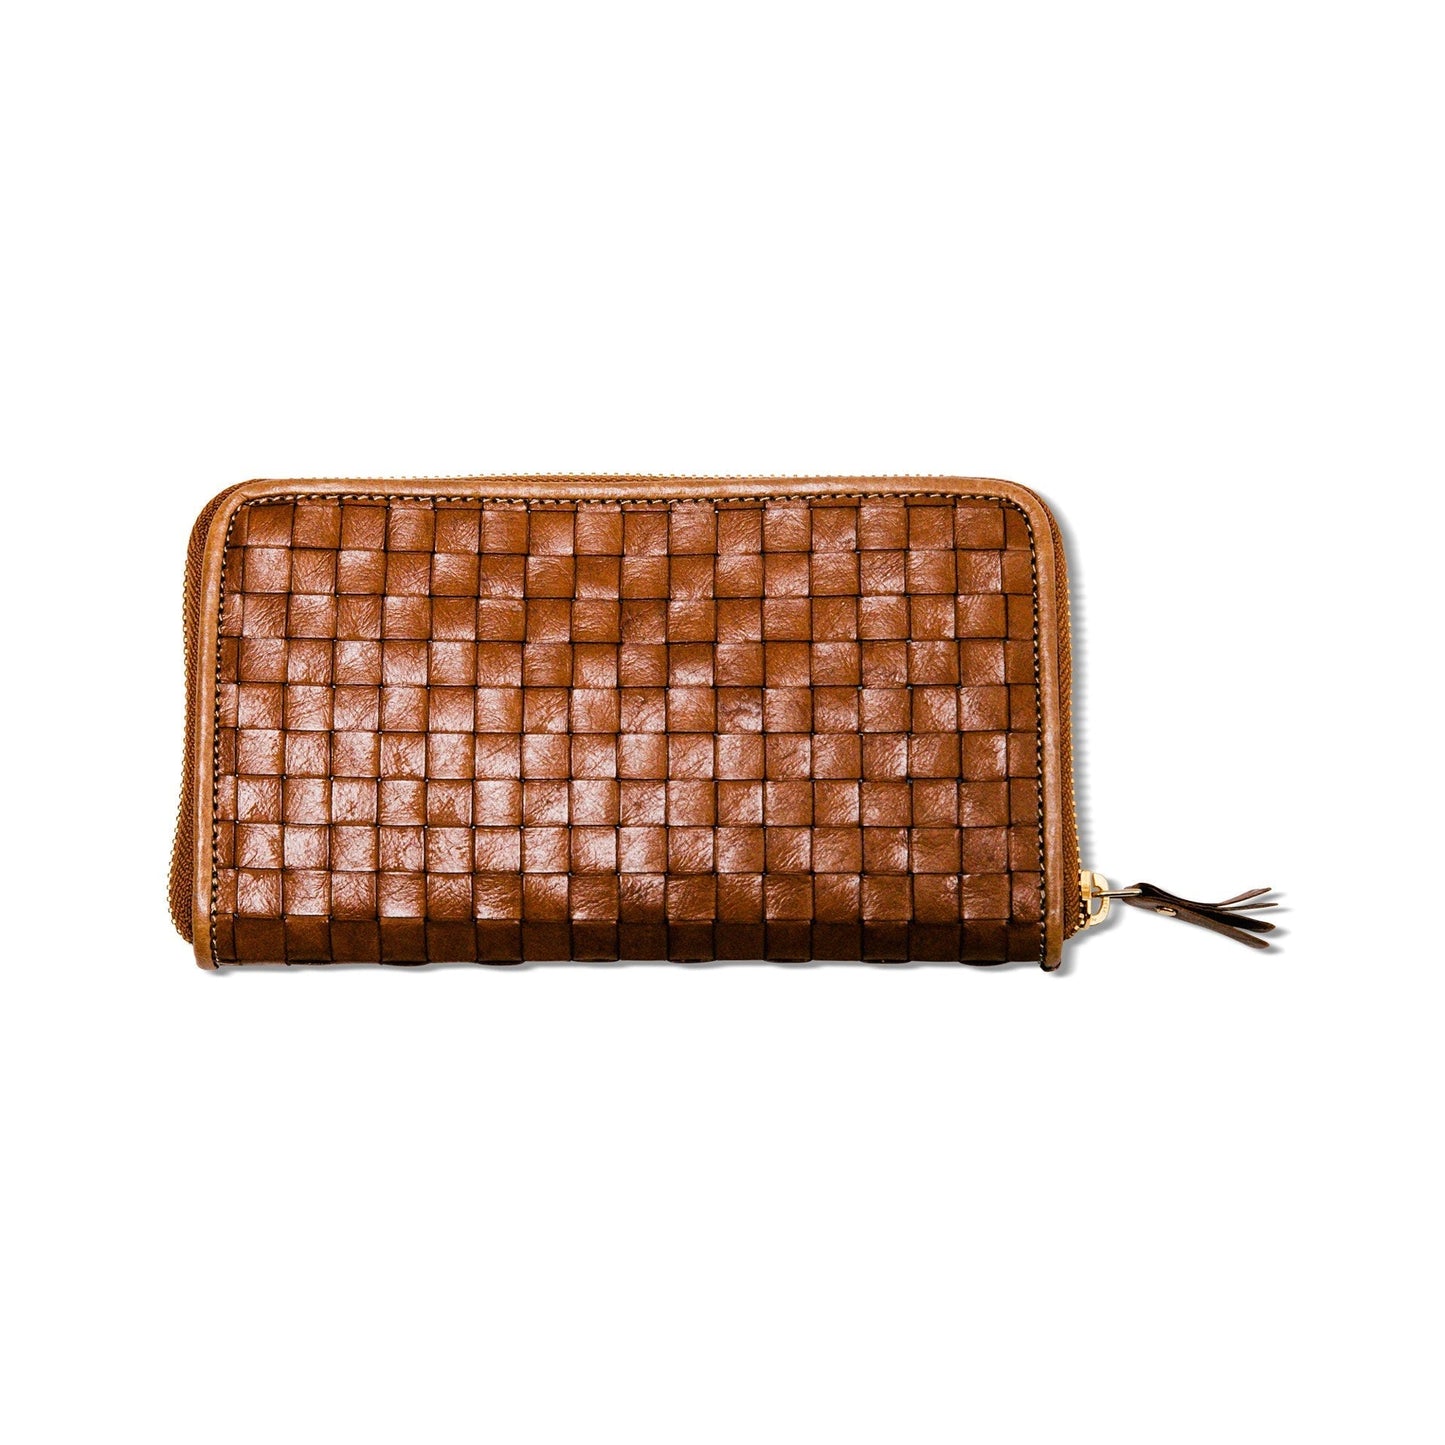 The outside of a large zippered washable paper woven wallet is shown. The image also shows a silver zip and washable paper zip pull. The wallet shown is dark tan in colour.